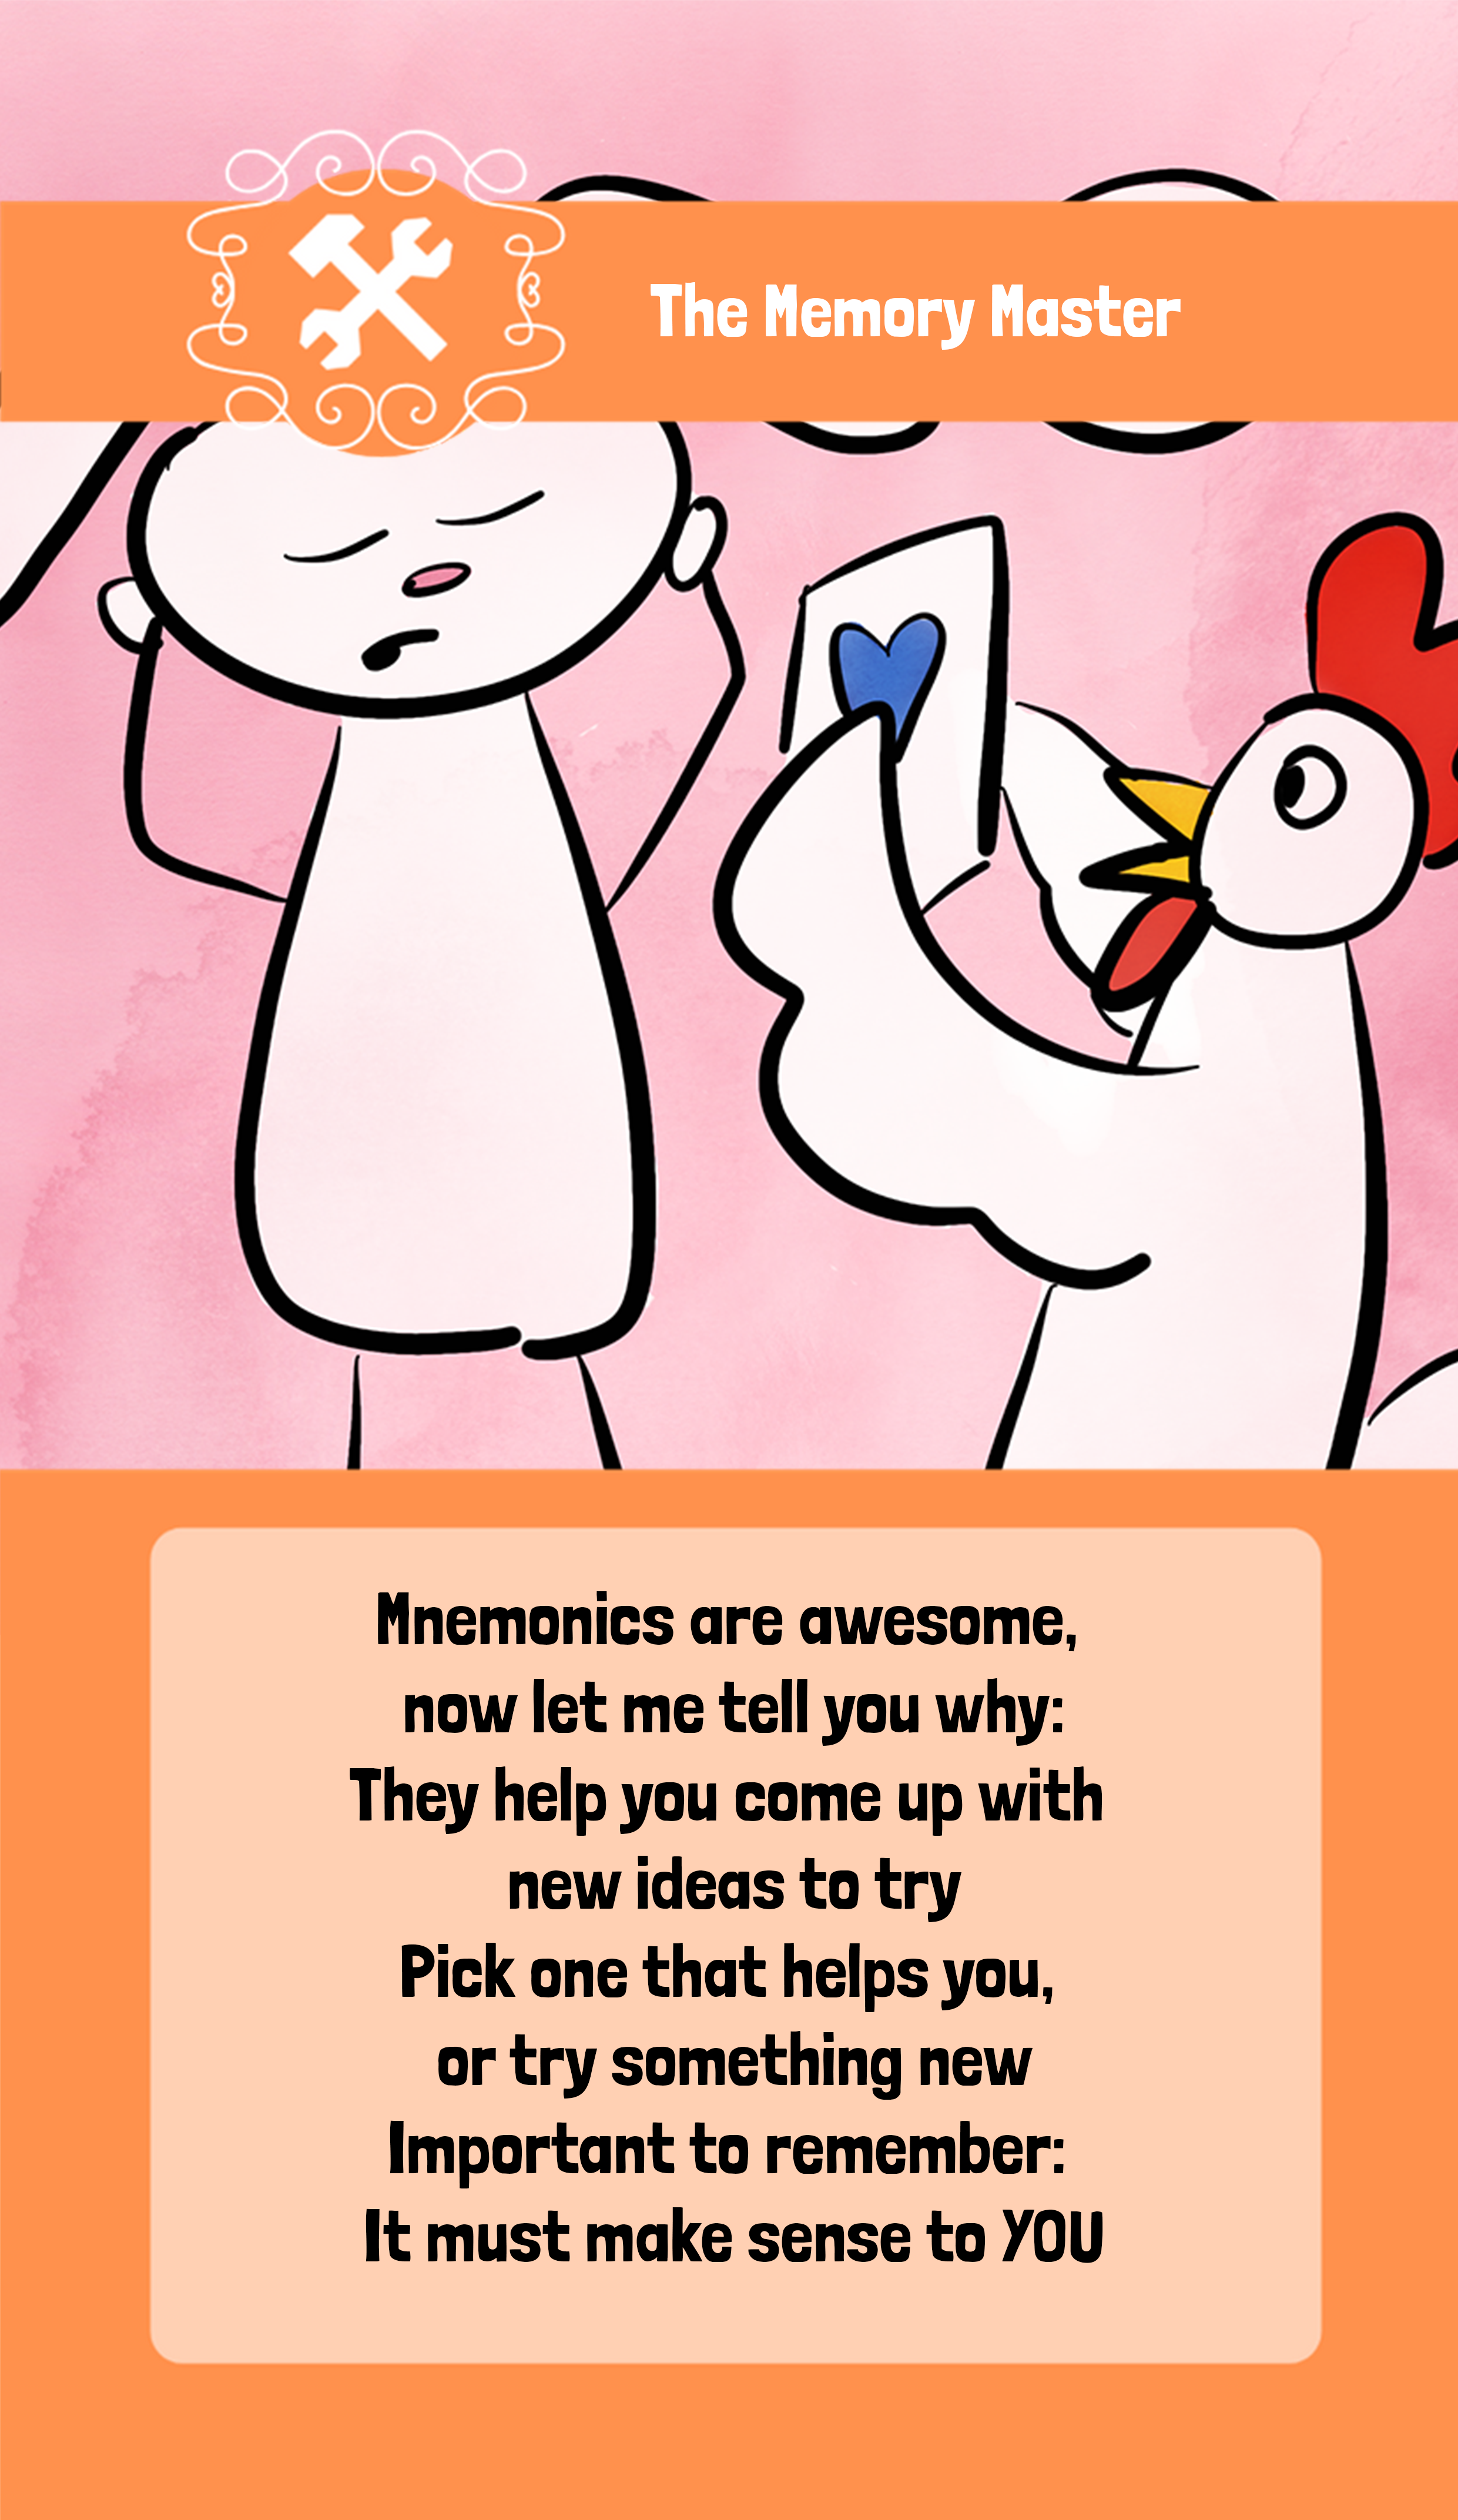 Picture of a chicken holding up a card with a blue heart, while a rabbit tries to guess the card